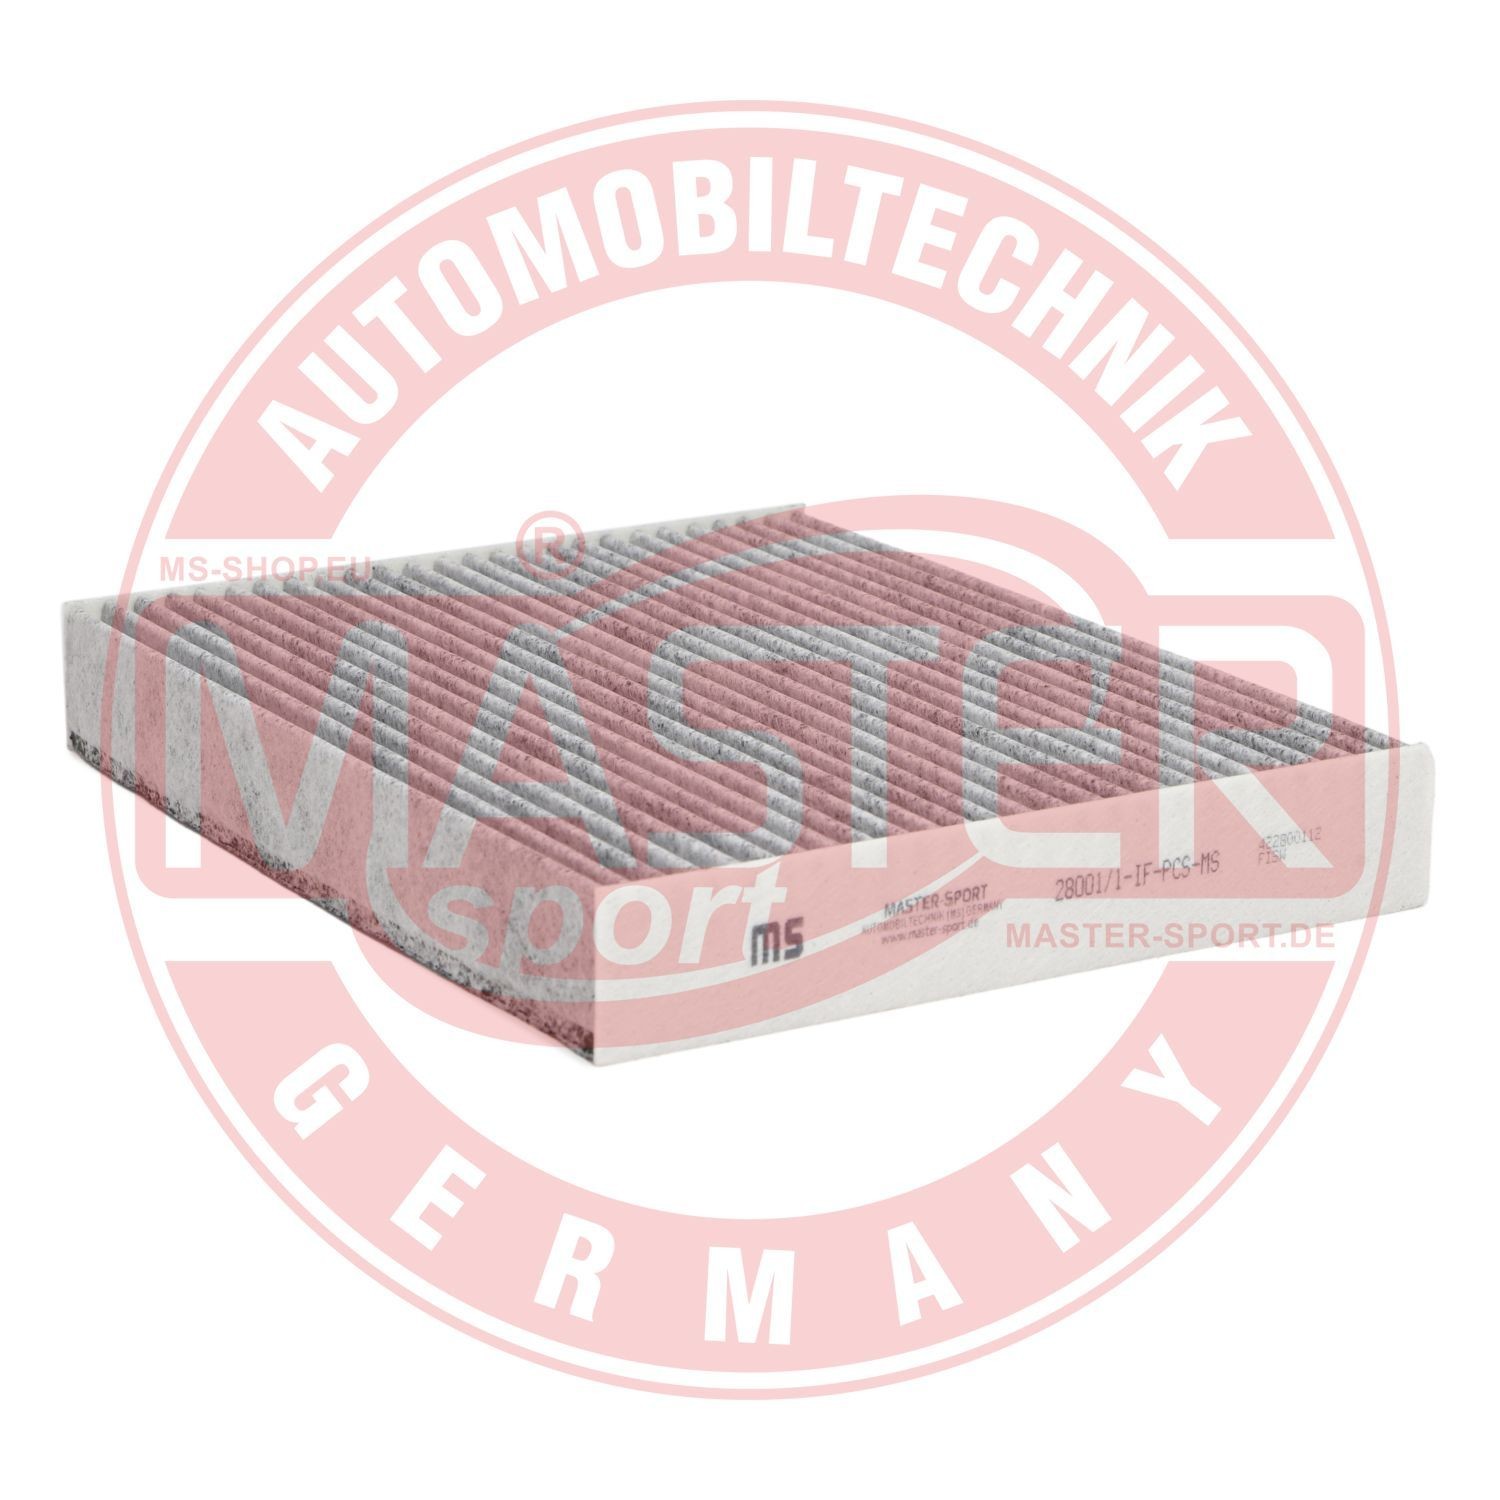 Ford MONDEO Aircon filter 15307918 MASTER-SPORT 28001/1-IF-PCS-MS online buy